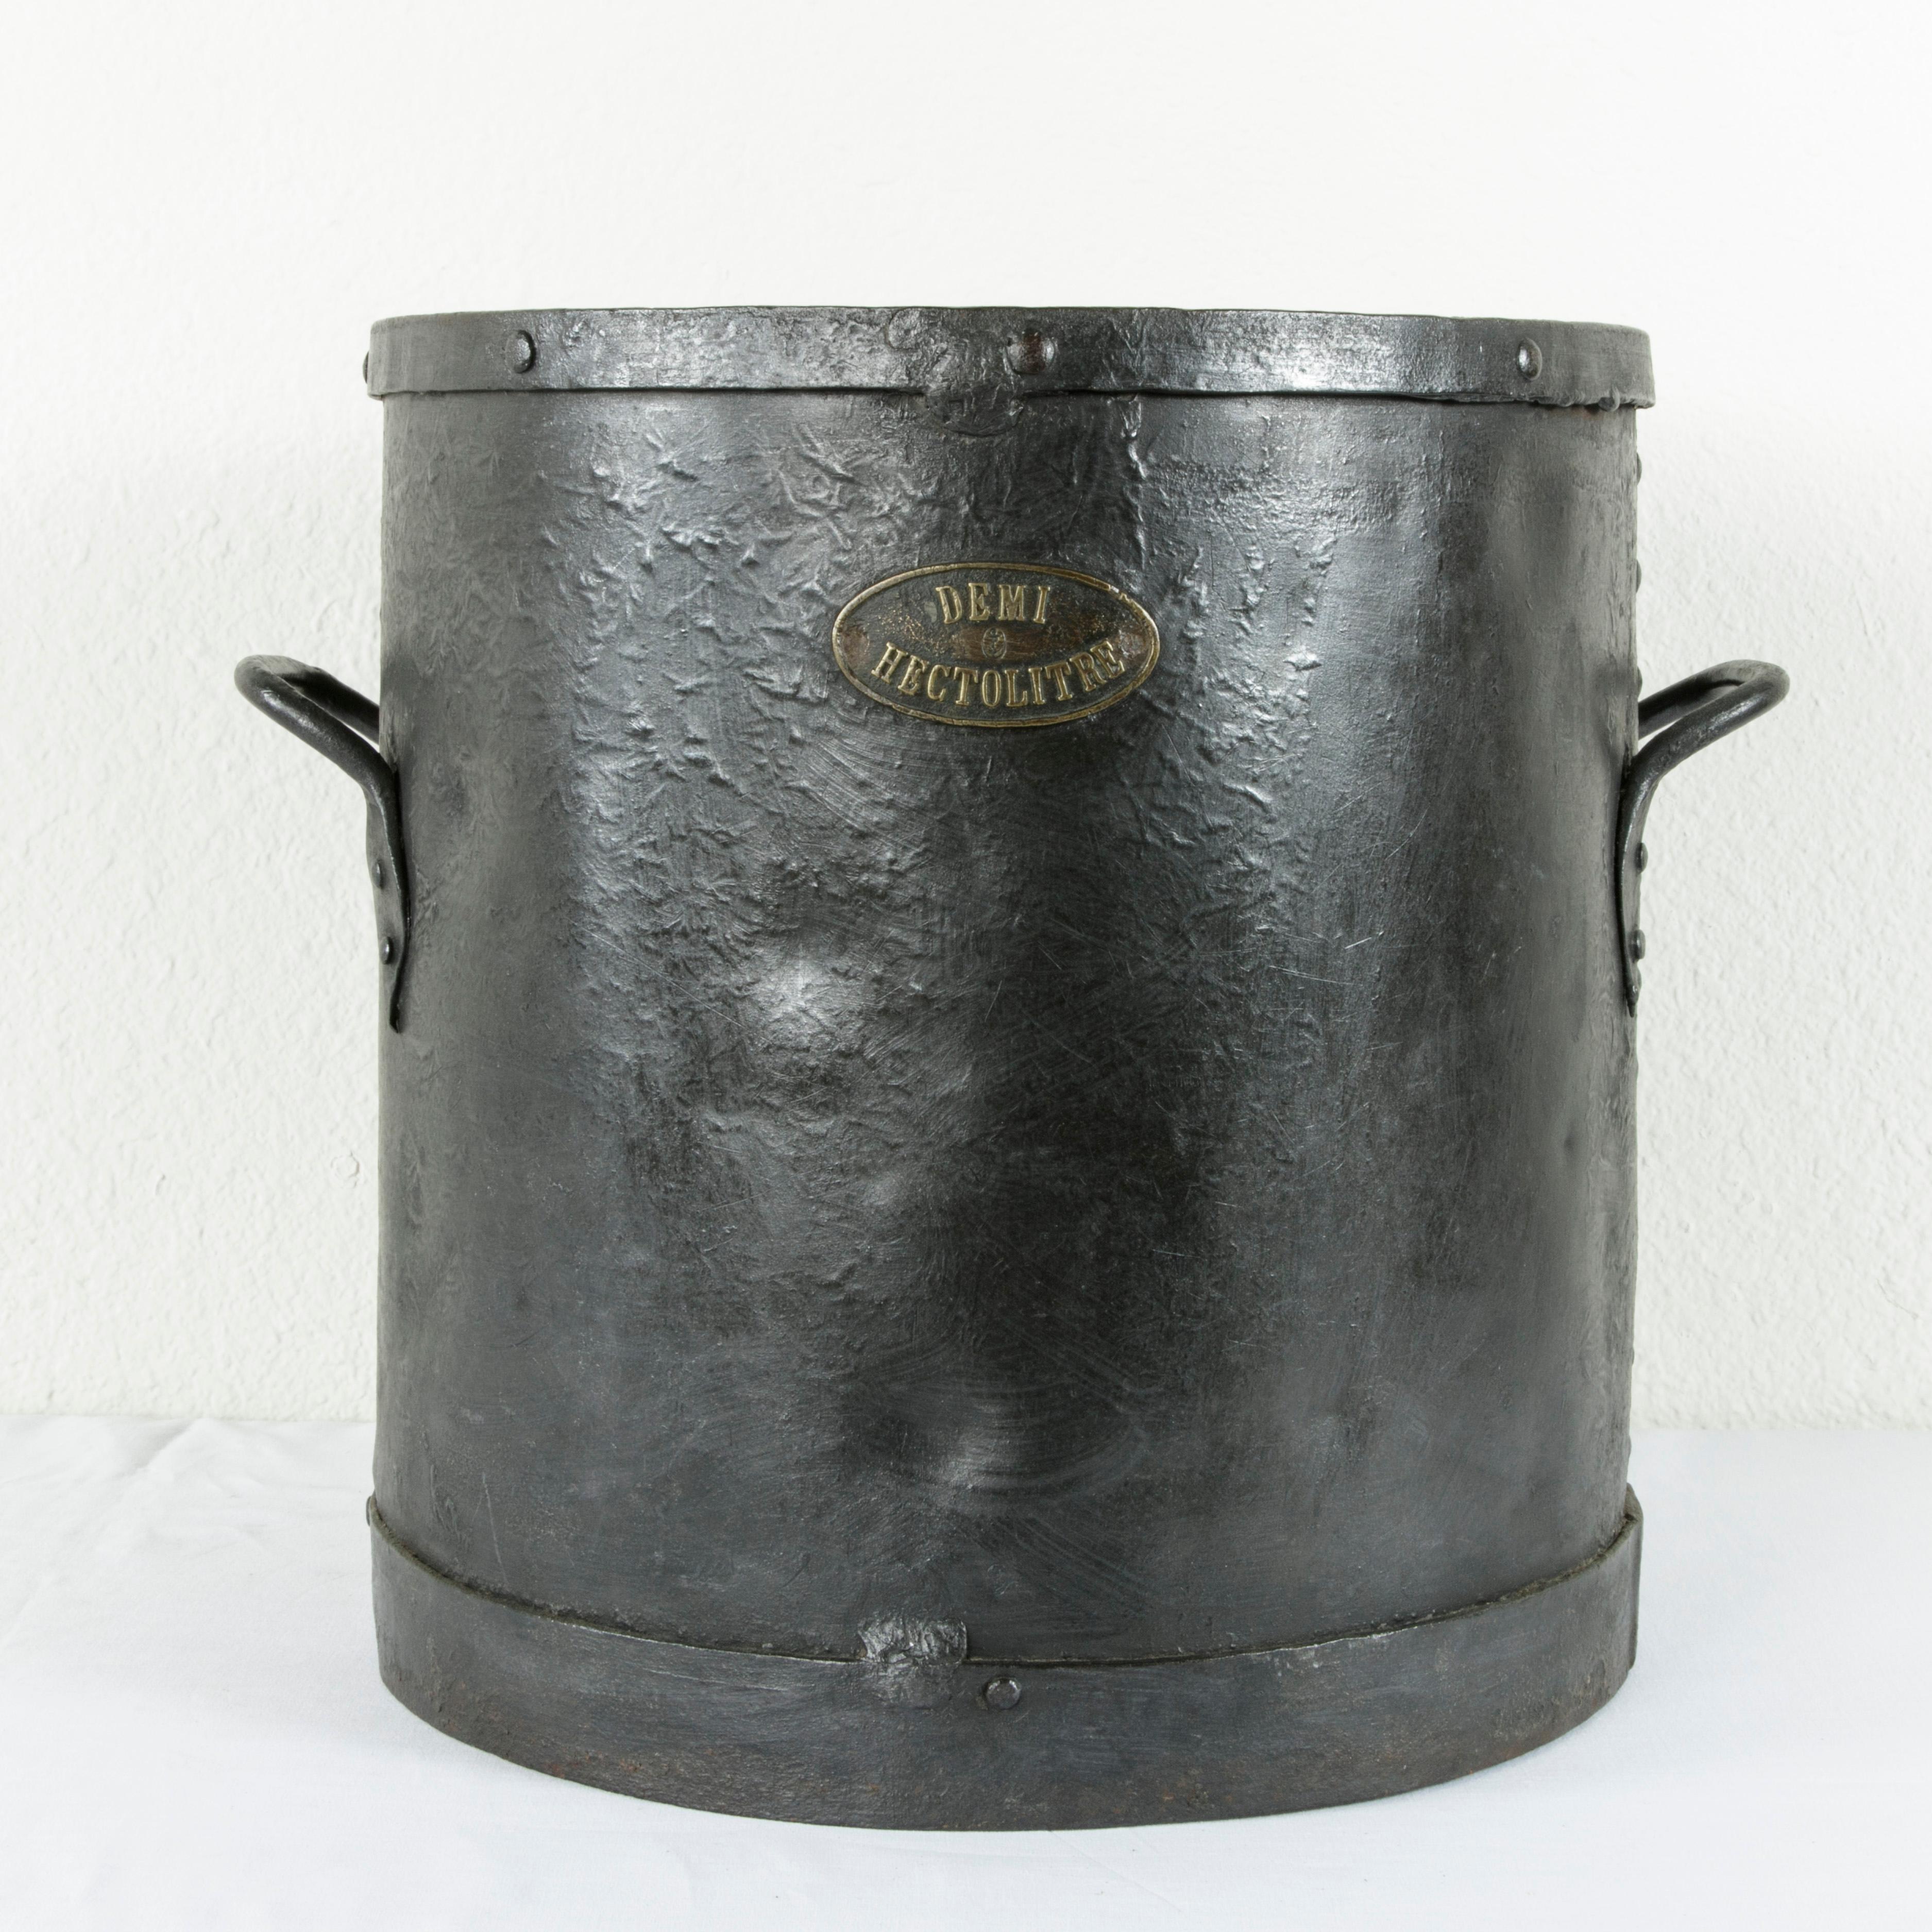 Early 20th Century French Iron Grain Measure, Planter, or Cachepot with Handles, circa 1900